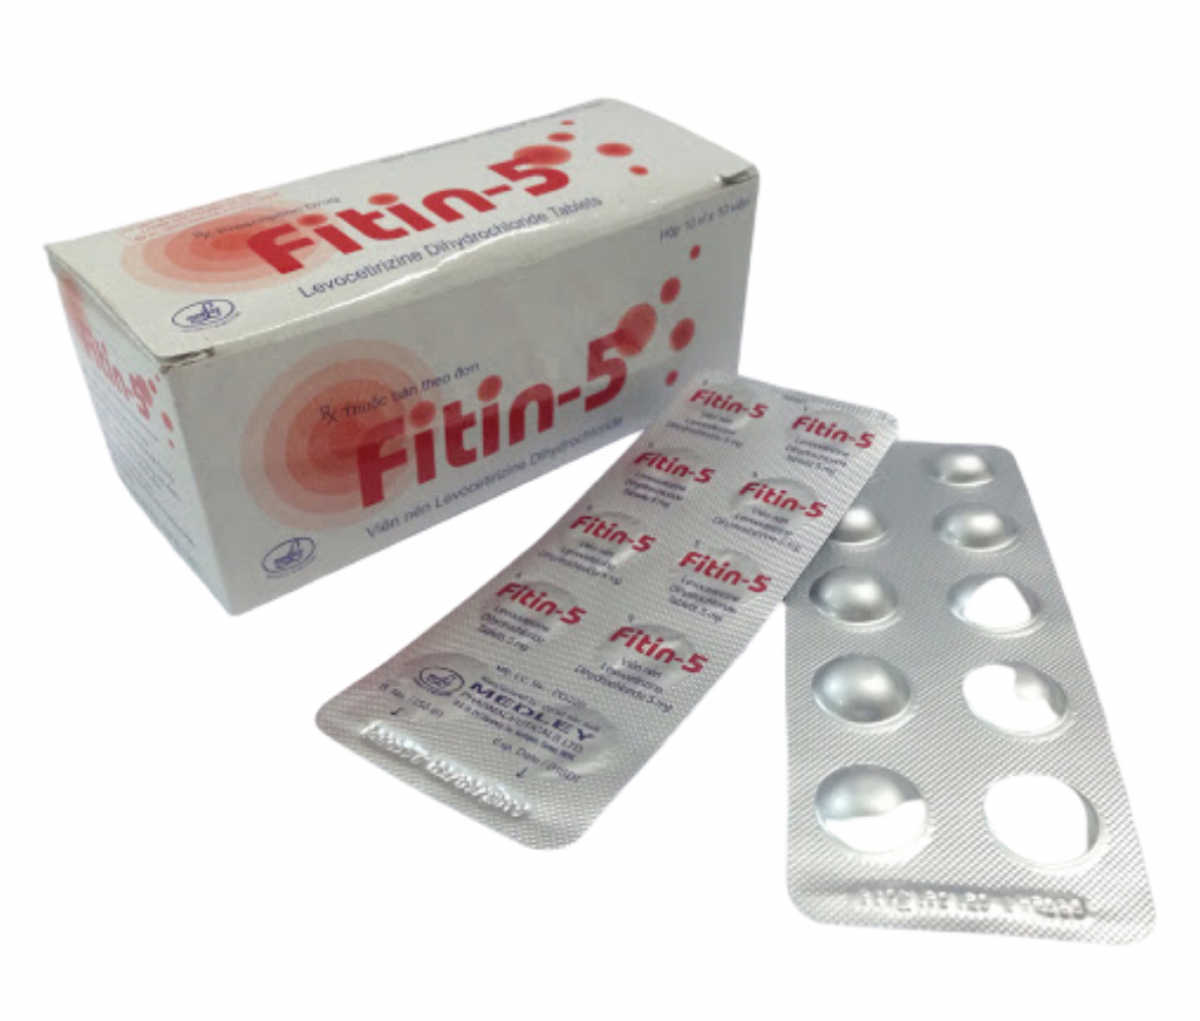 Fitin 5mg Tablet